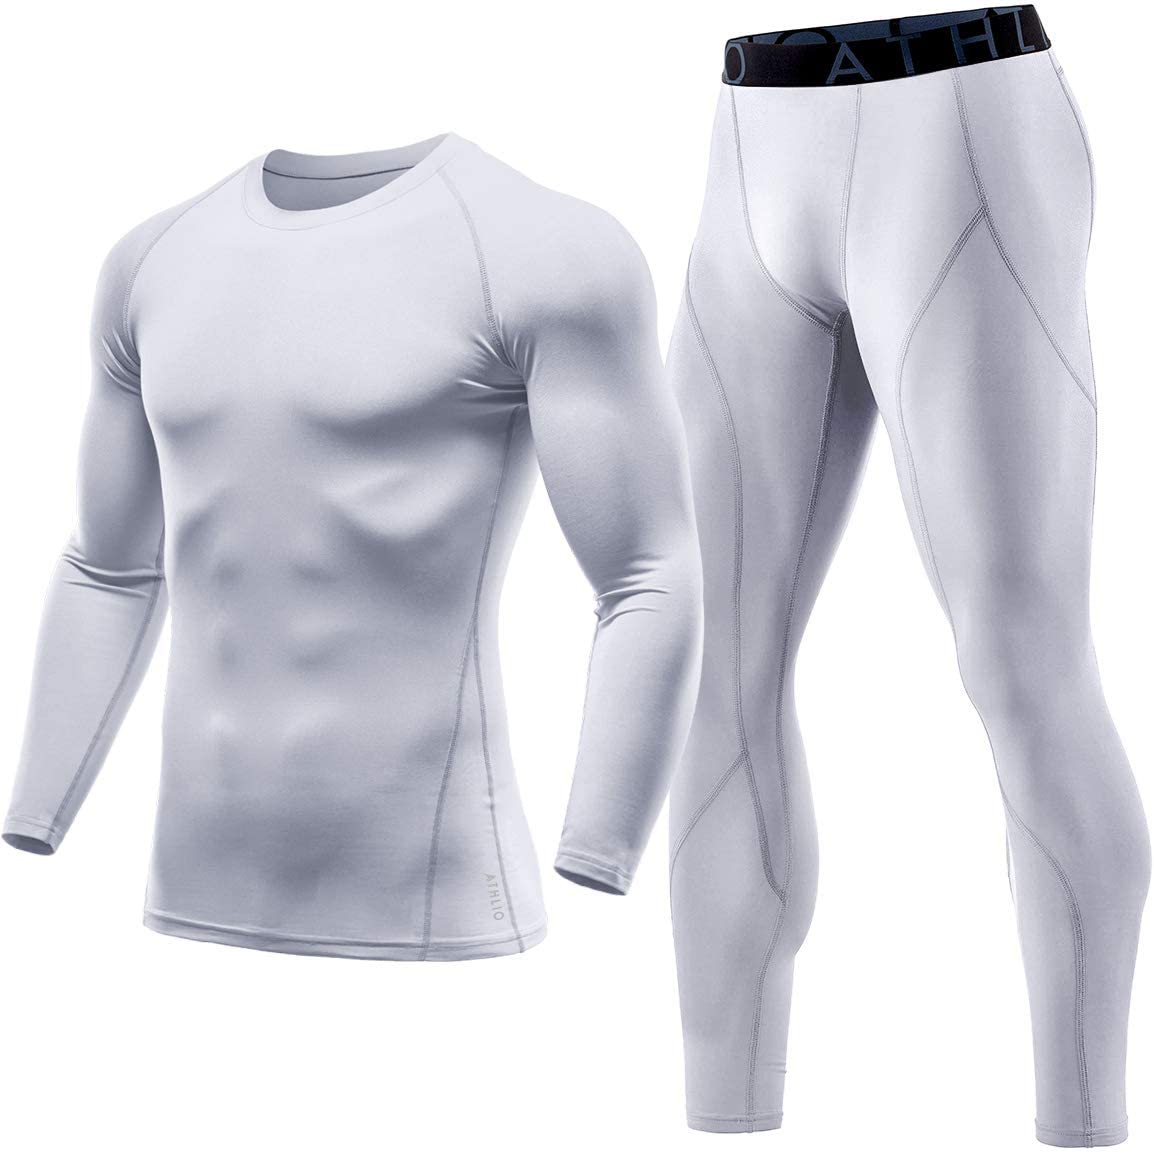 Microfiber Soft Warm Base Layer Winter Cold Weather Top & Bottom Set ATHLIO Men's Thermal Compression Pants & Shirts